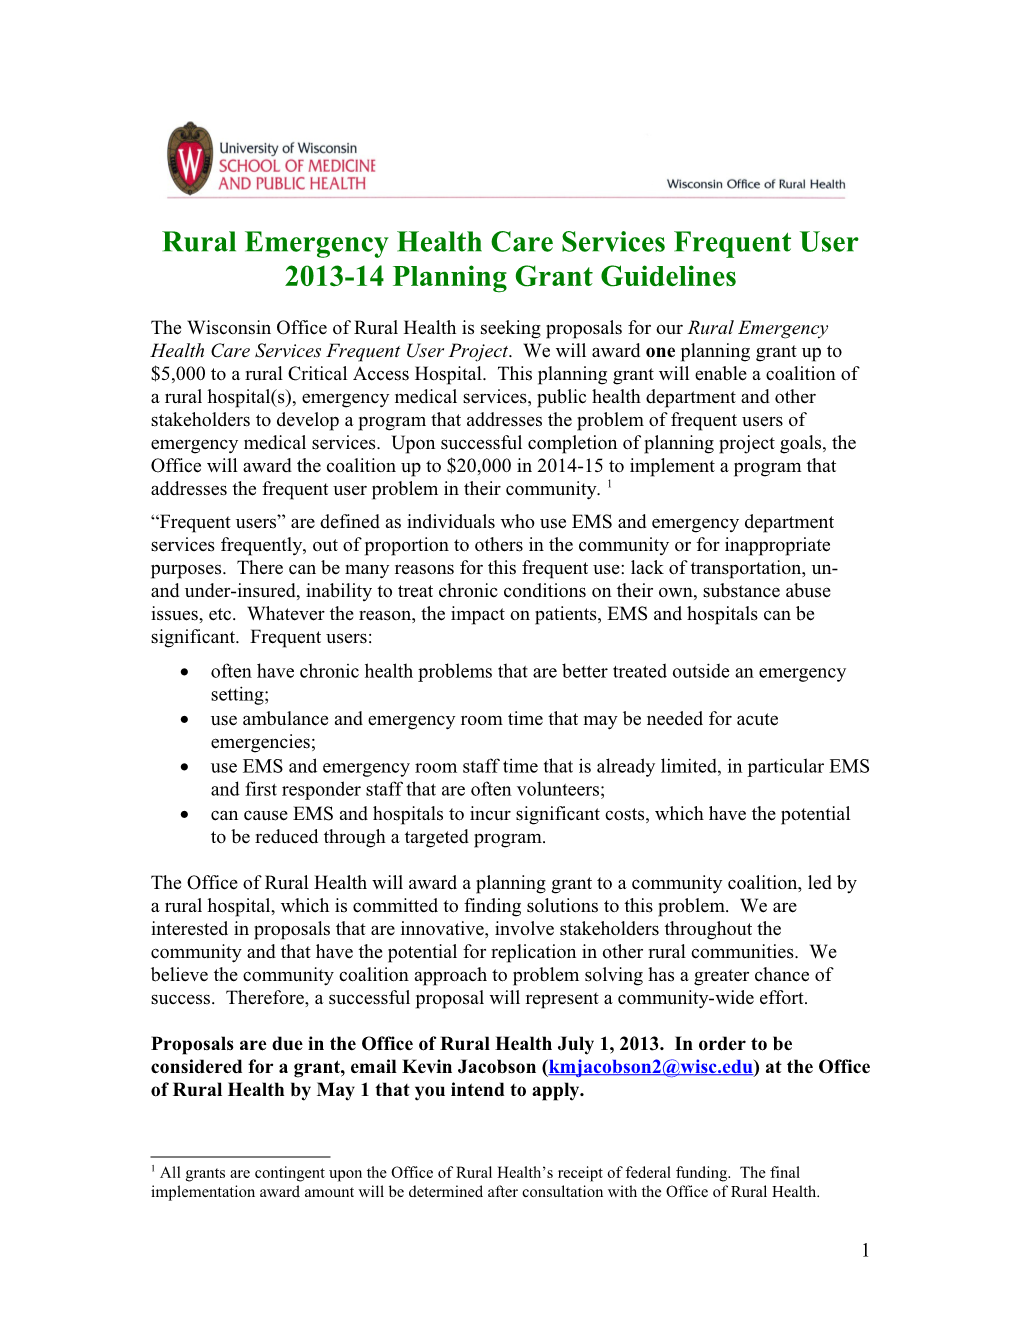 Wisconsin EMS Planning Document